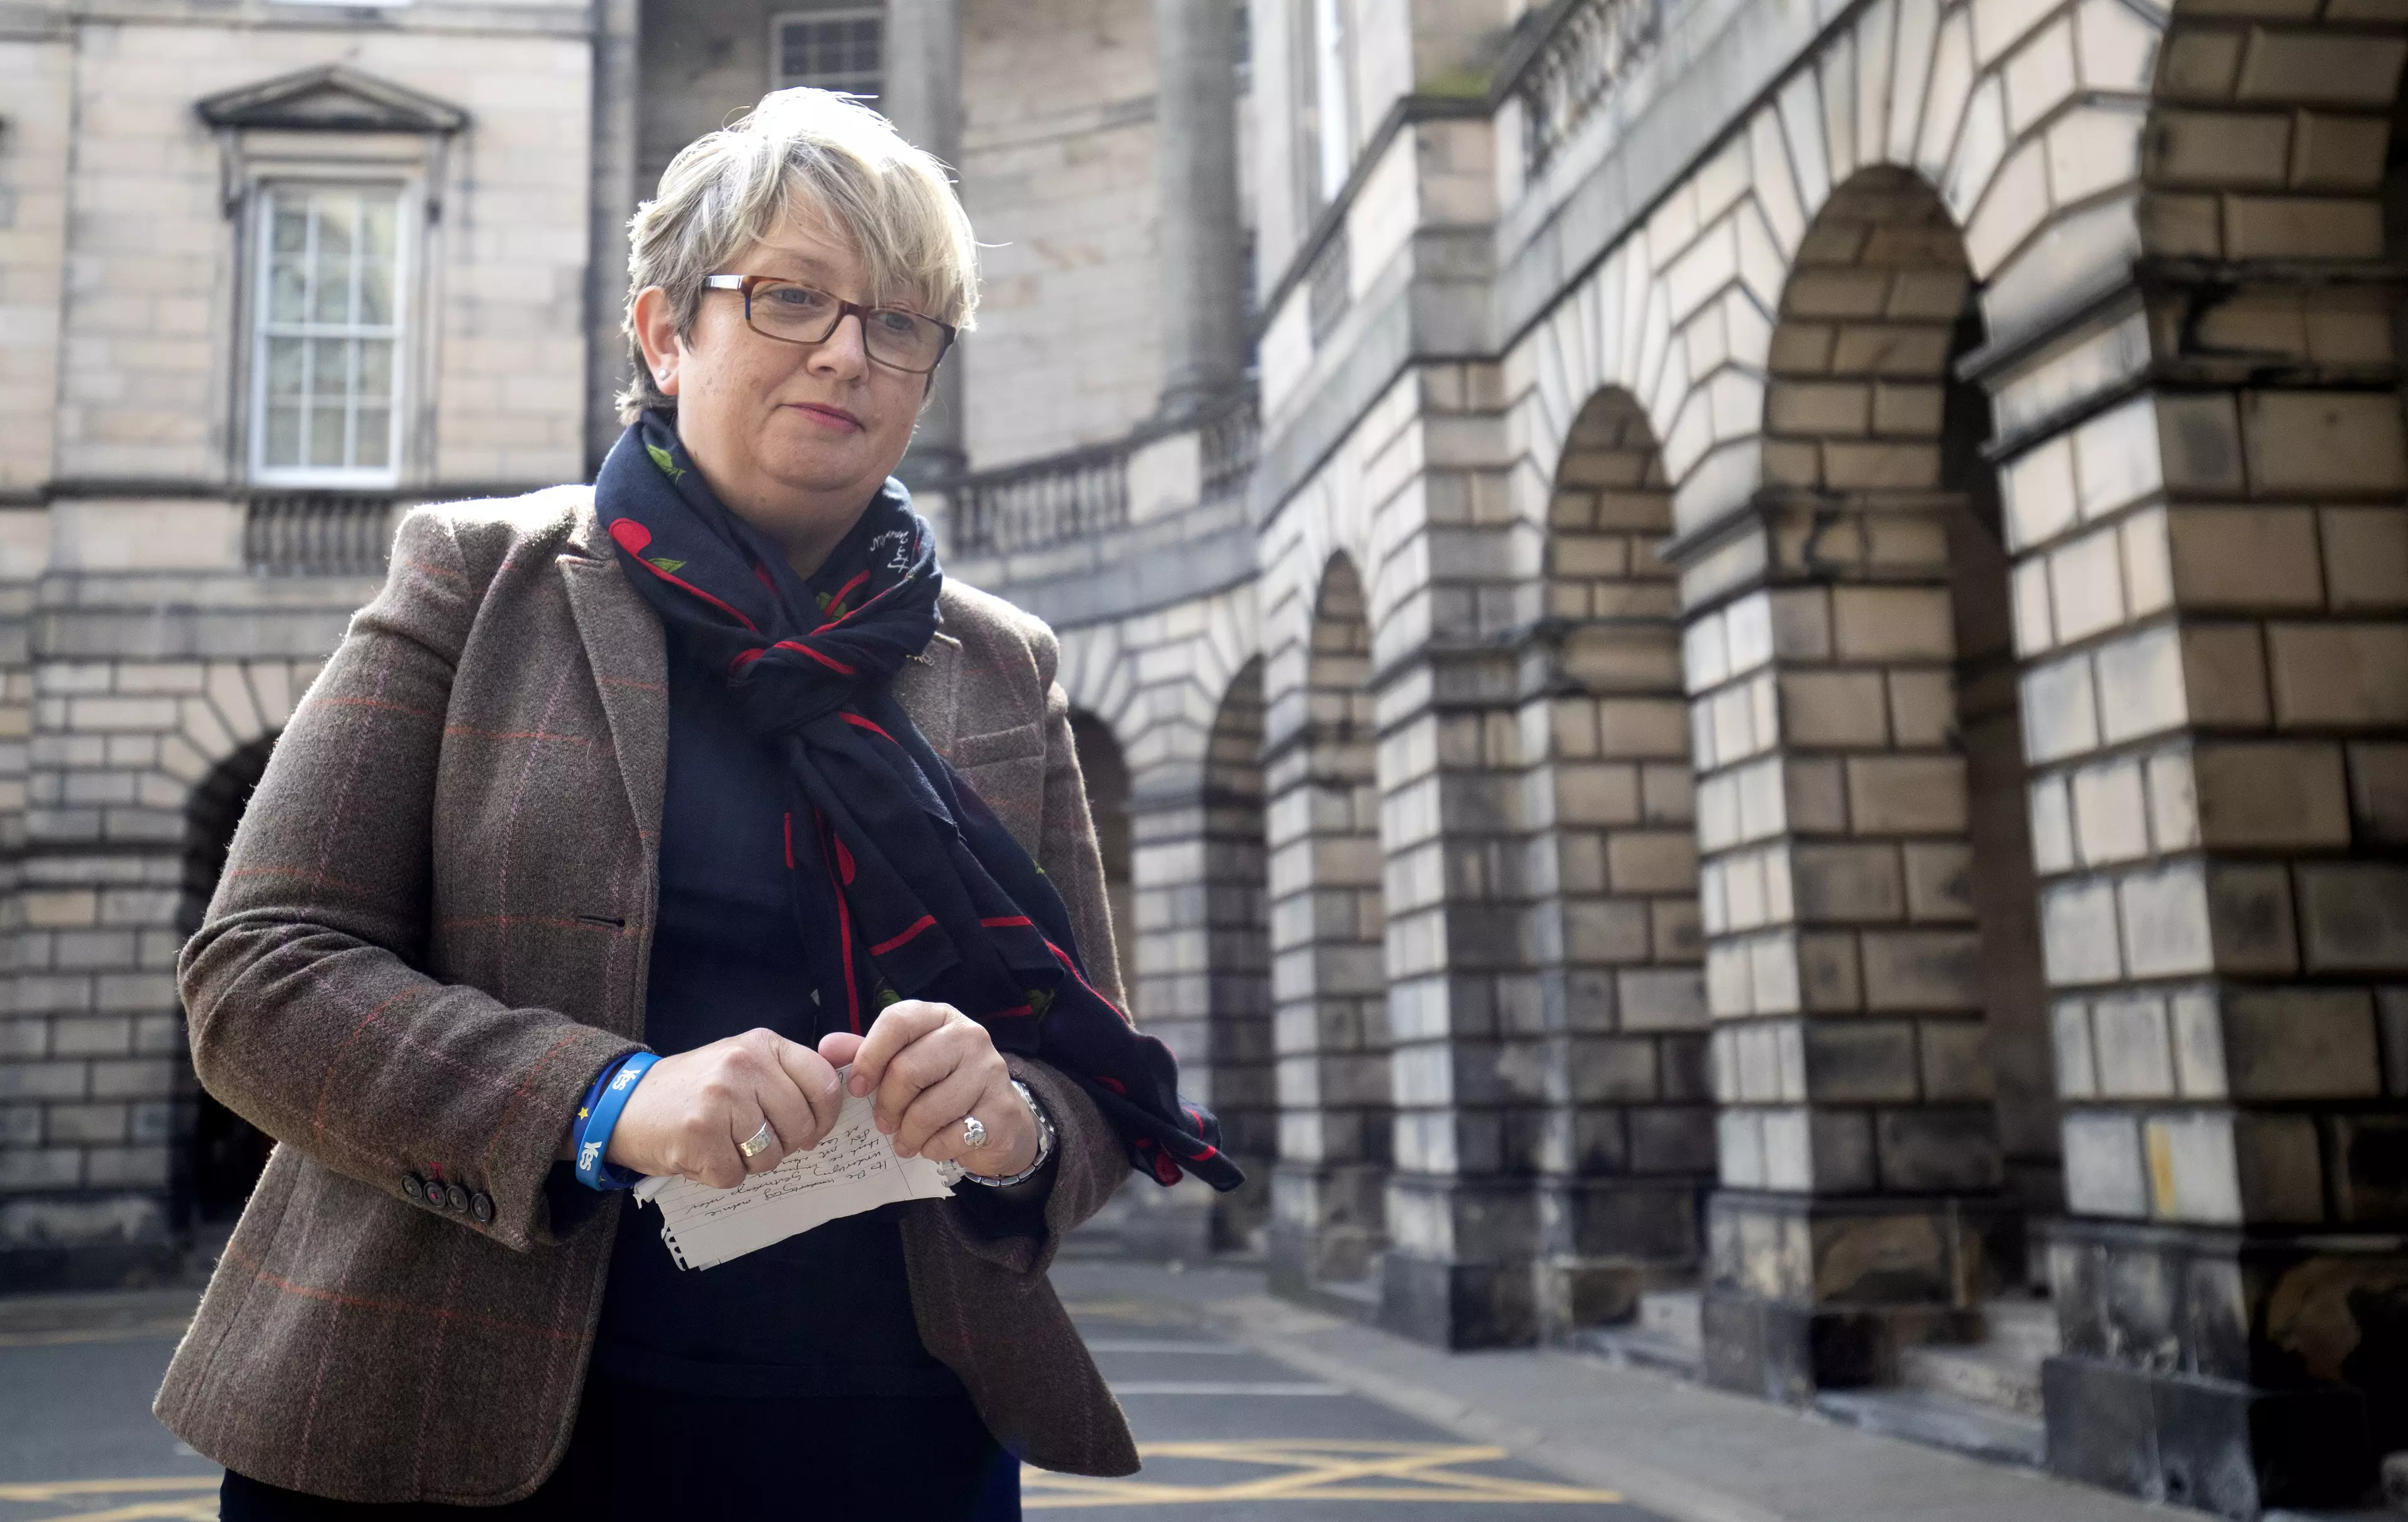 SNP MP Joanna Cherry, who led the legal challenge, outside the Court of Session in Edinburgh.